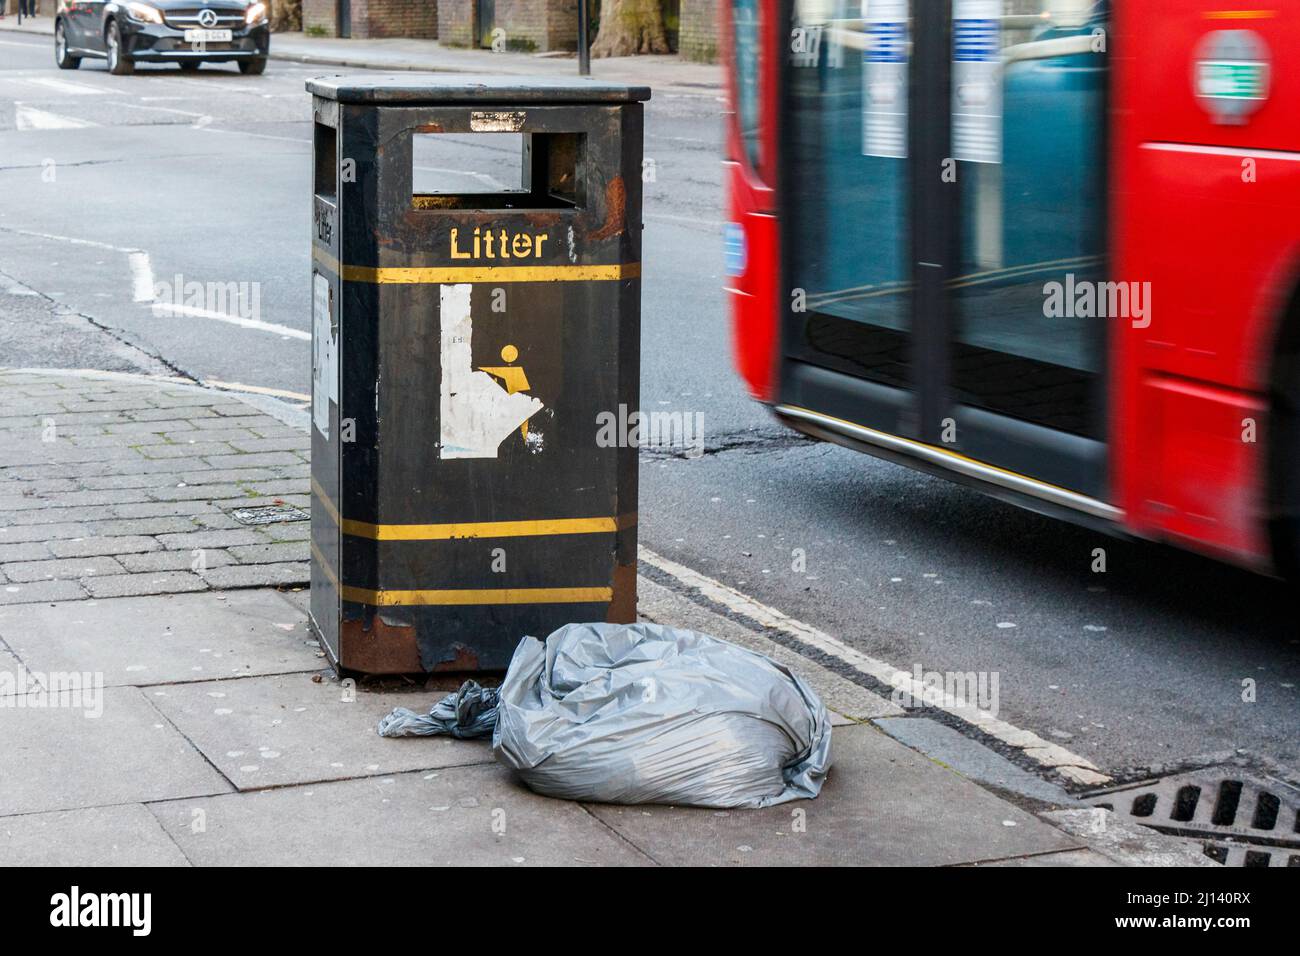 A bag of rubbish left next to a litter bin, London, UK Stock Photo